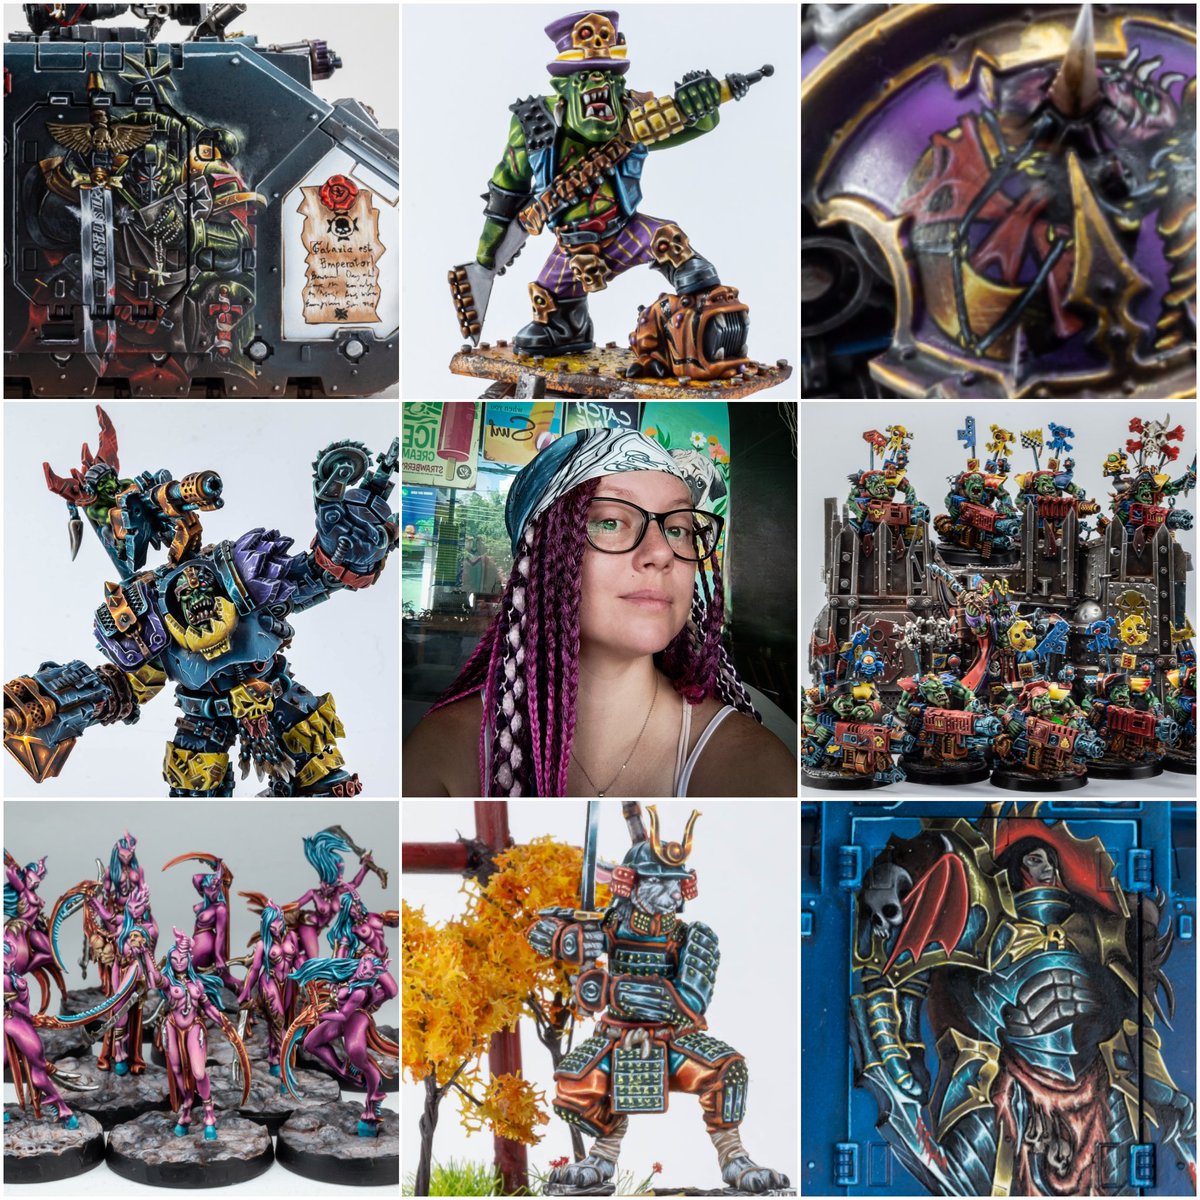 #artvsartist2023 I love my work! This year I learned many things)  With love to the universe 😇 #paintingwarhammer #WarhammerCommunity #warhammer40k #WarhammerArt #warhammerAOS #paintingminiatures #creaturecaster #artisopus #scalecolorArtist #lamiapainting ponycatminiatures.com